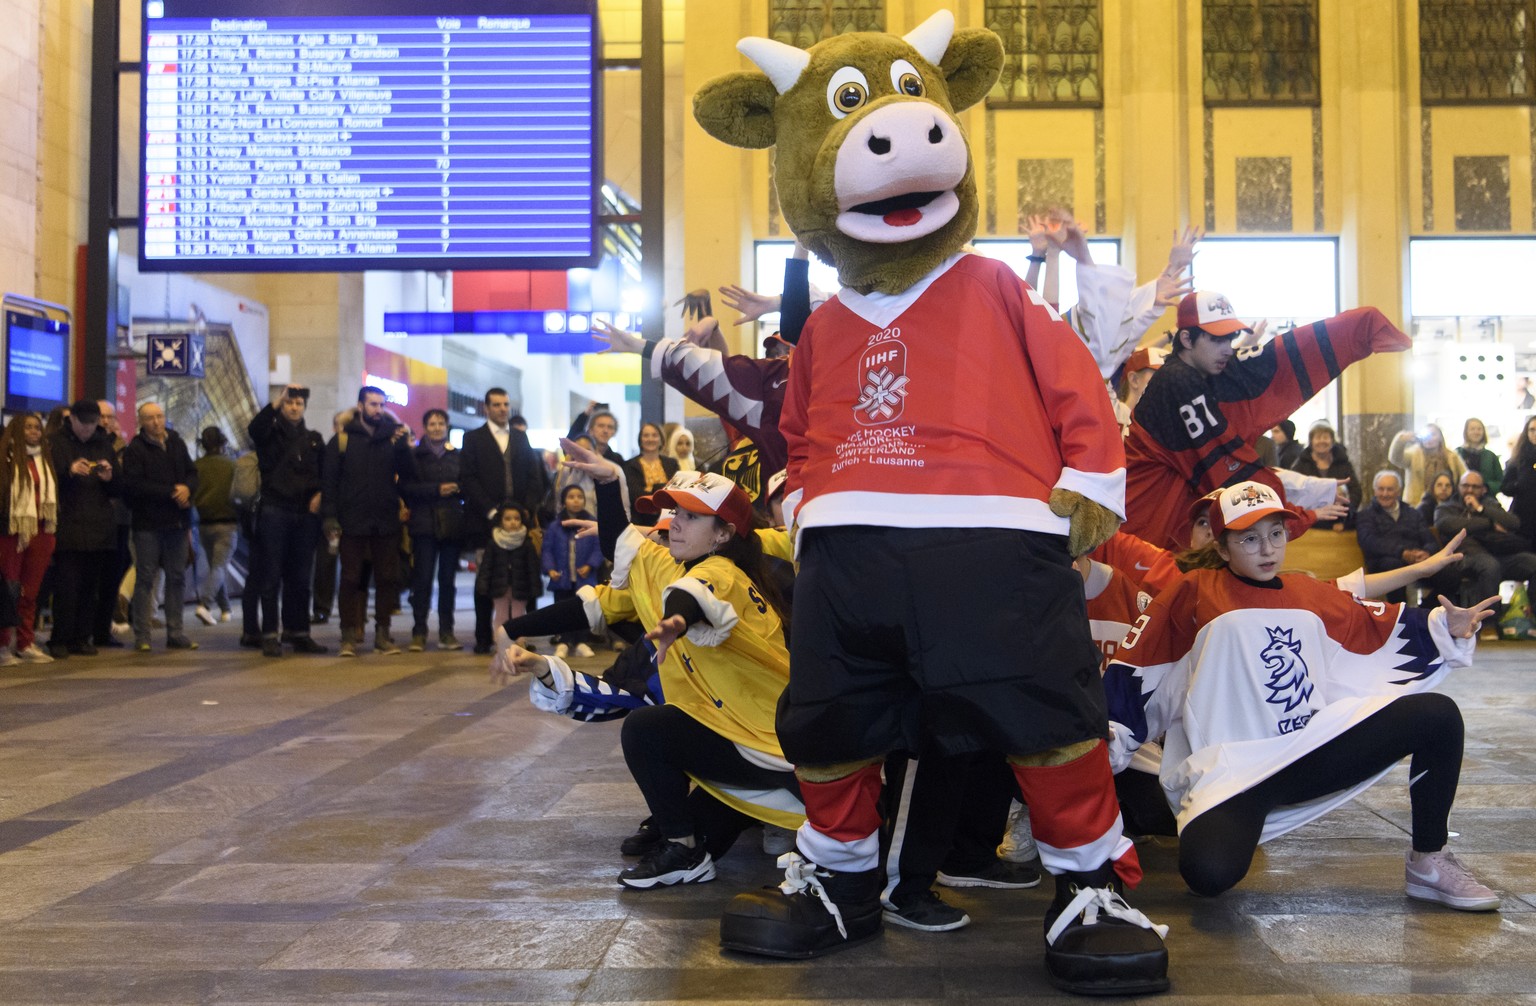 Cooly, the official mascot of the 2020 IIHF Ice Hockey World Championship dance with kids during a flashmob 100 days before the 2020 IIHF Ice Hockey World Championship at the CFF train station, in Lau ...